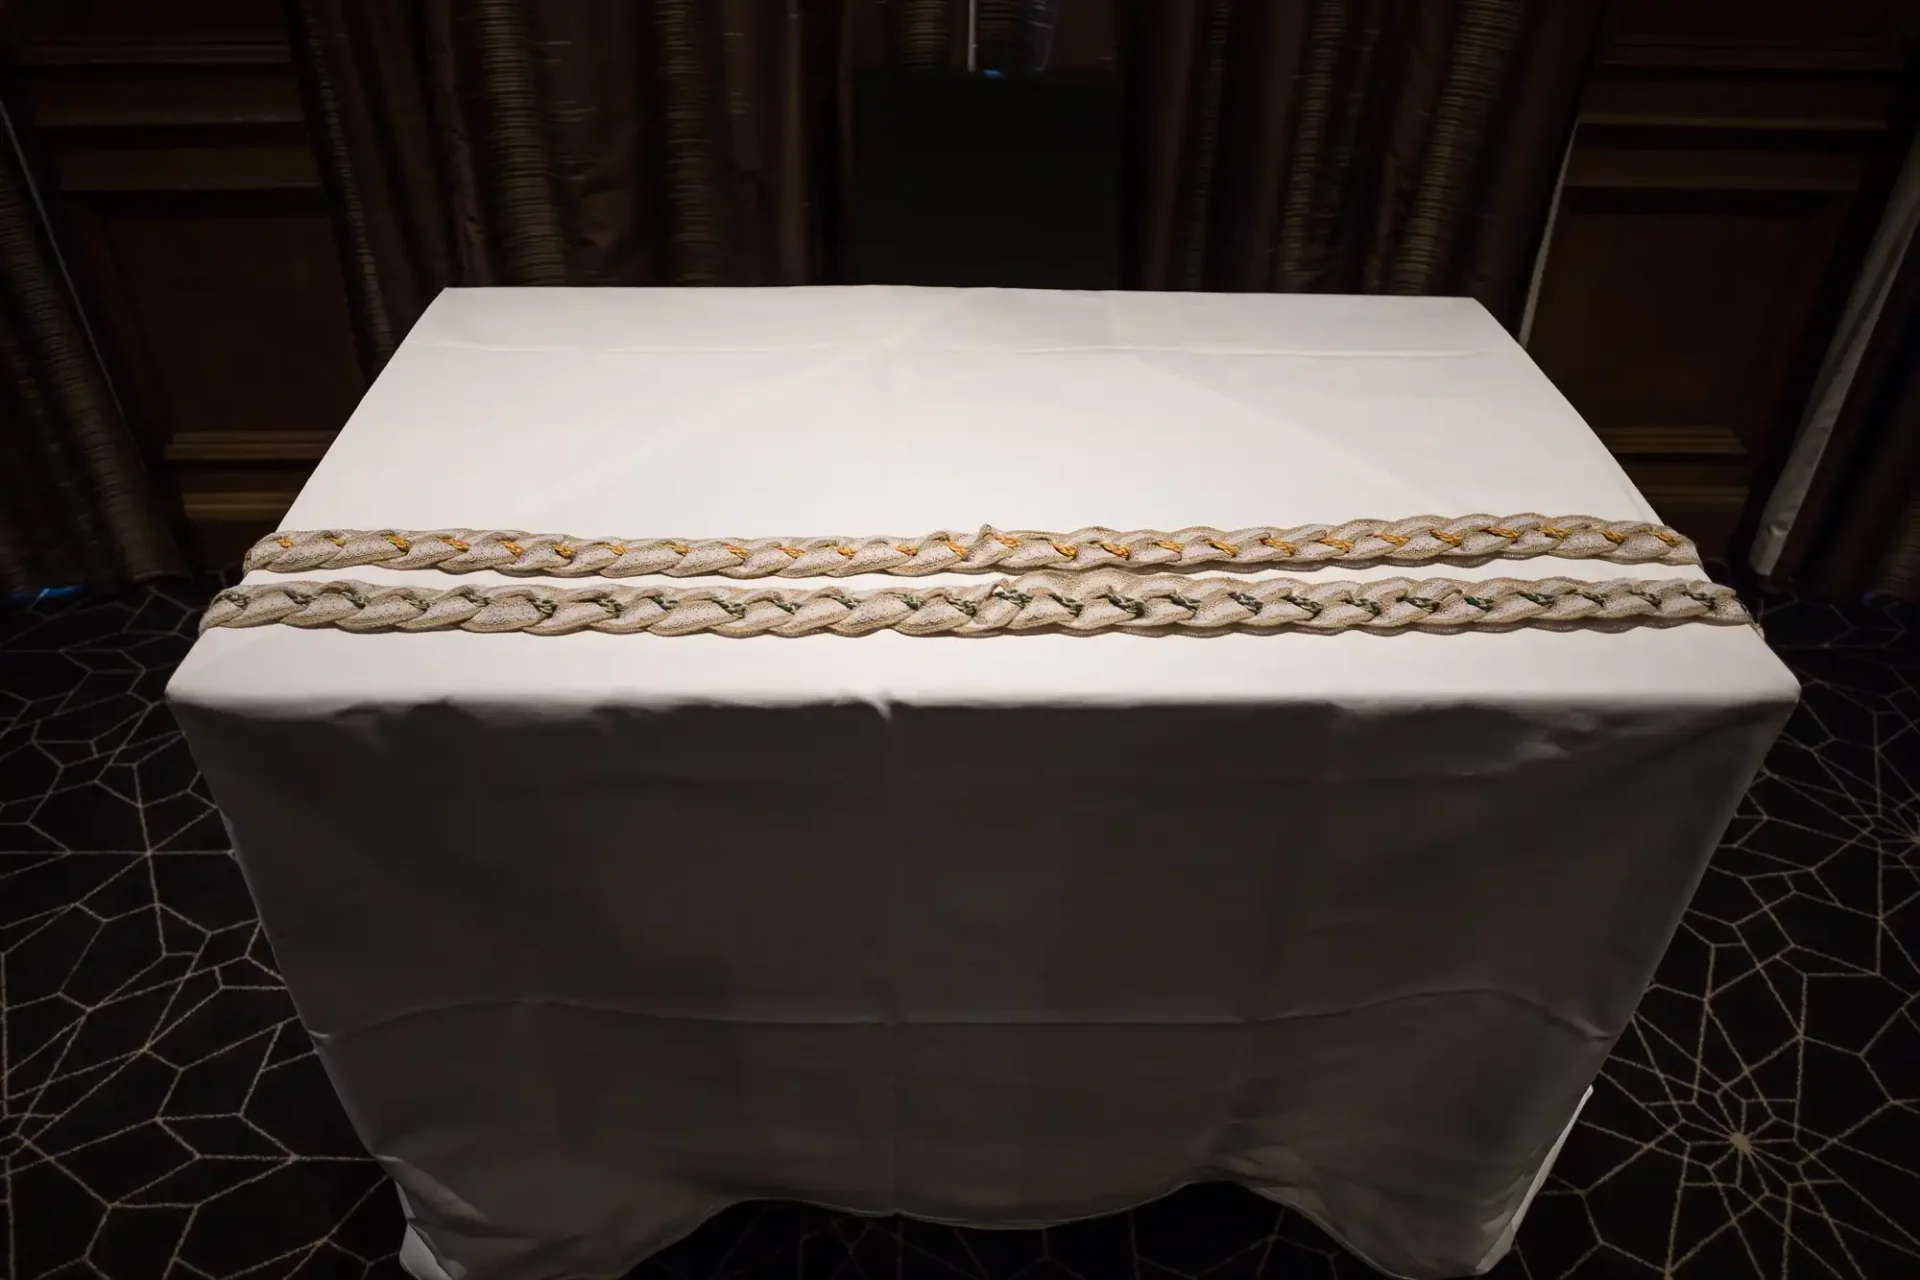 A neatly draped white tablecloth on a rectangular table, accented with an intricate golden braid along the front edge.